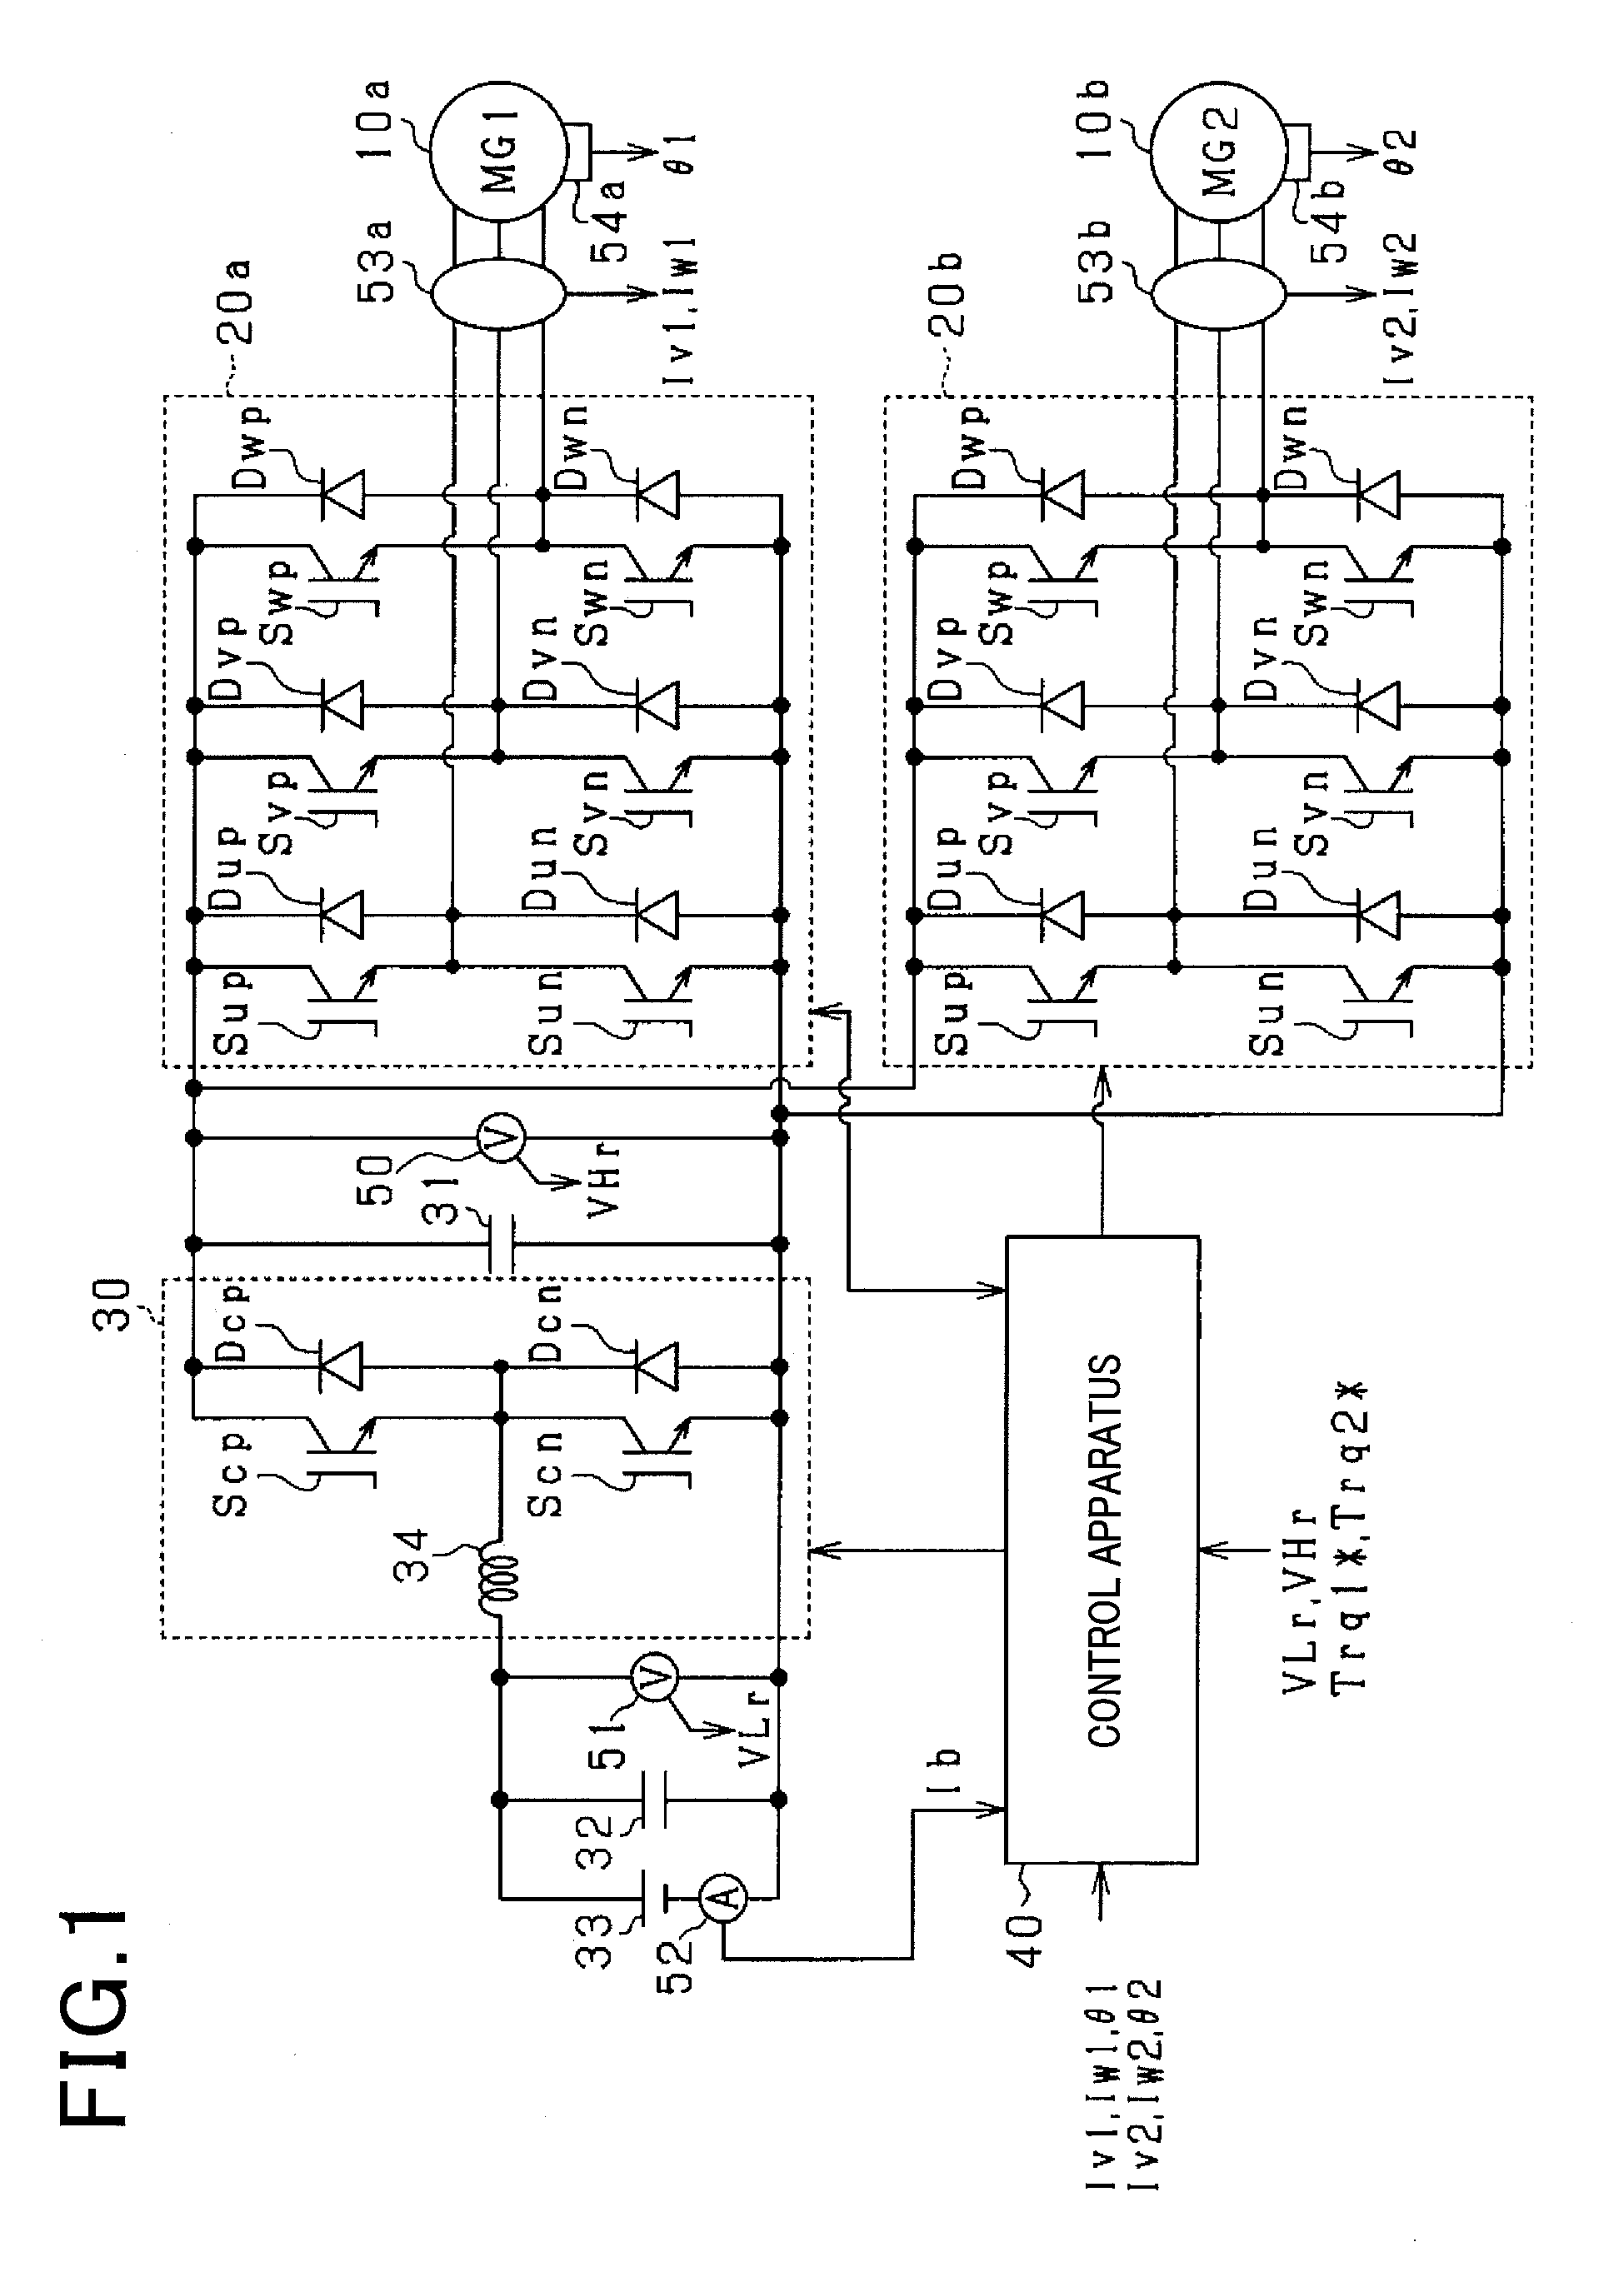 Control apparatus for motor control system